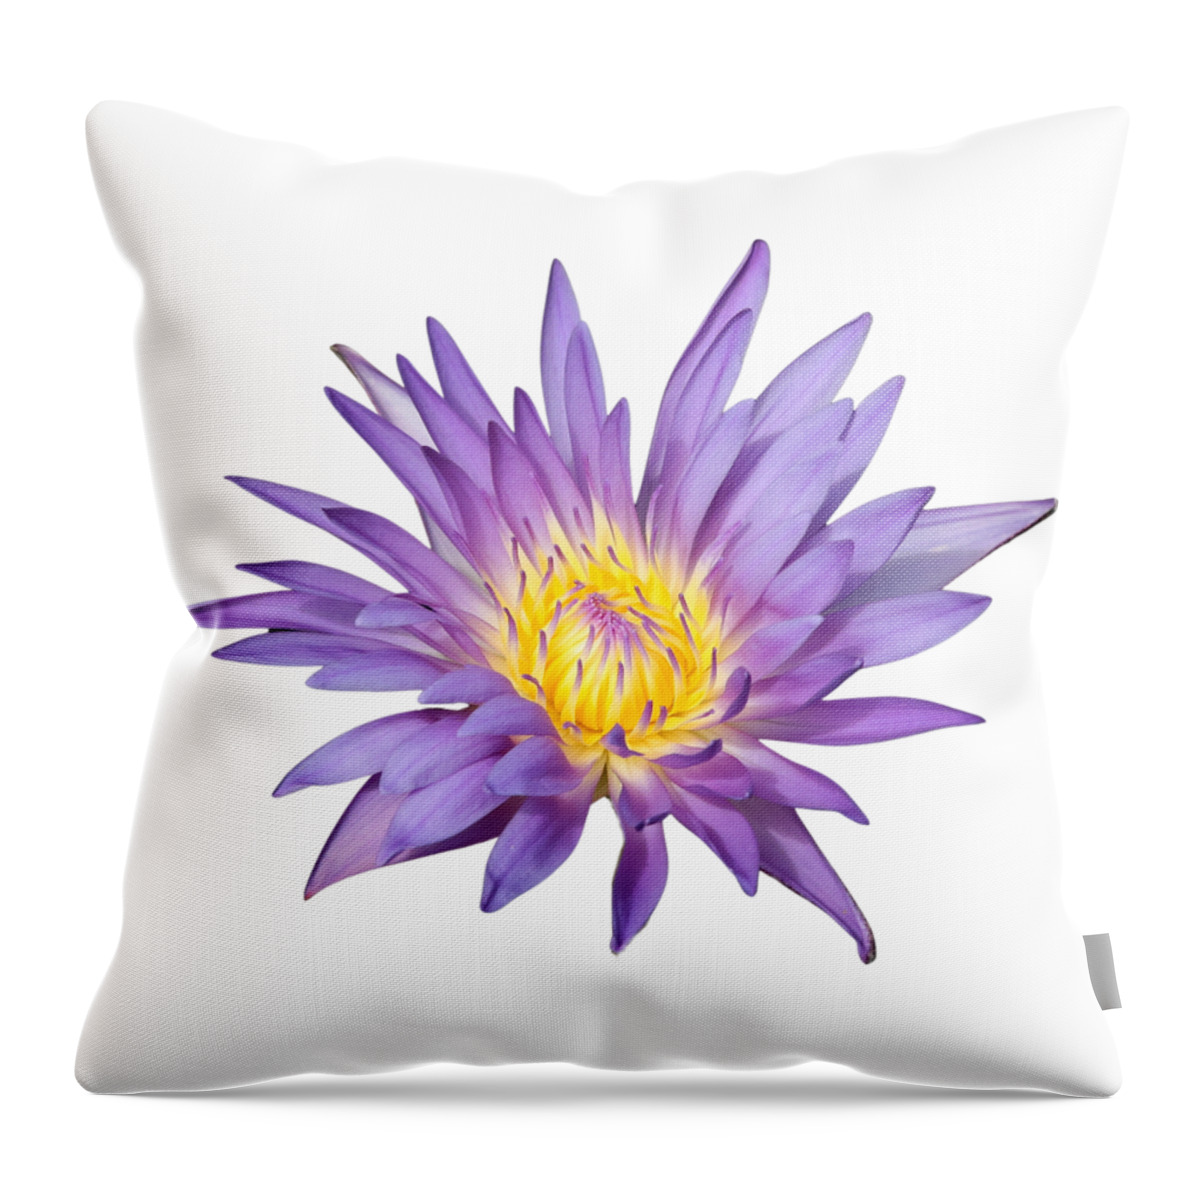 Water Lily Throw Pillow featuring the photograph Lavender Water Lily by Carol Groenen